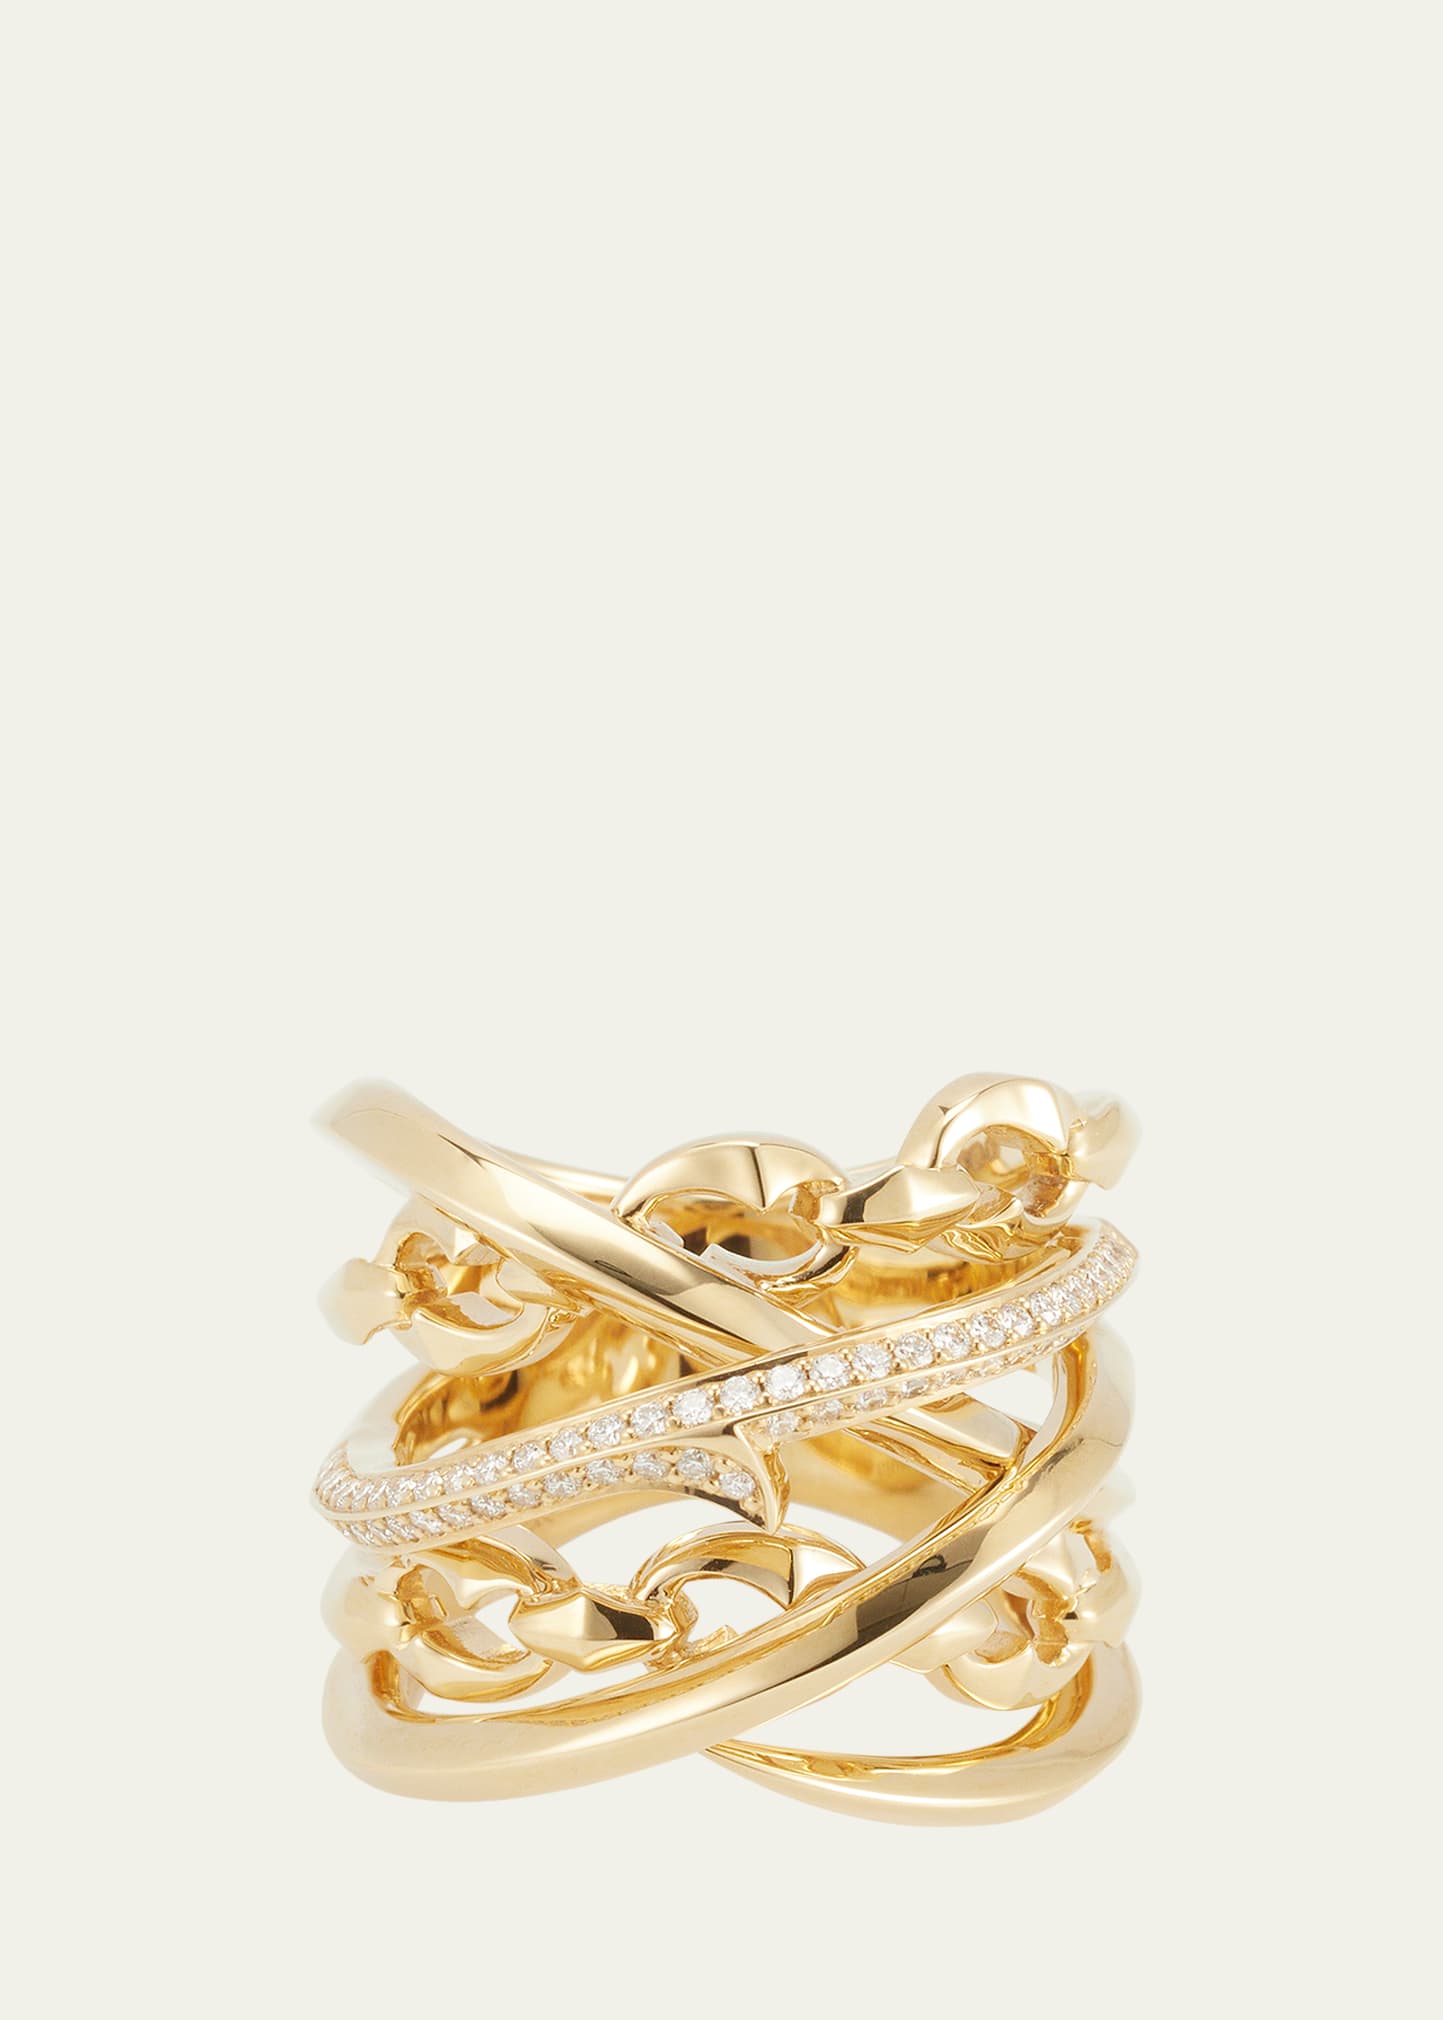 Stephen Webster Bound Together 18k Gold Band Ring With Diamonds